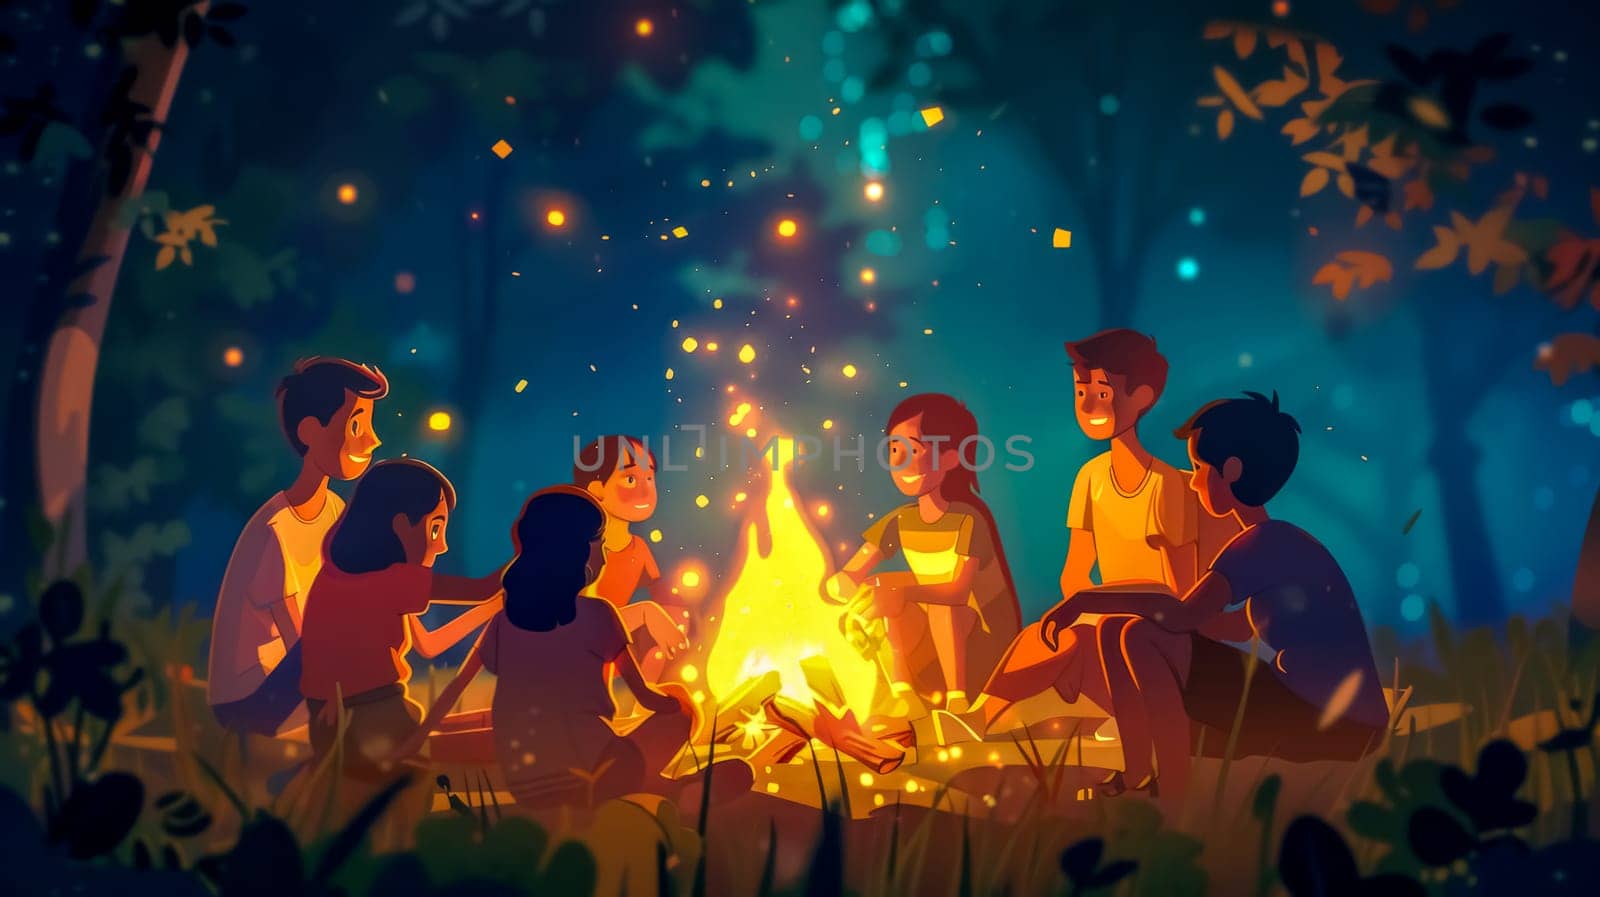 Gathering with friends around an enchanted campfire in the magical forest. Illuminated by luminescent fireflies. Enjoying a night of animated storytelling. Bonding. And togetherness in the outdoors